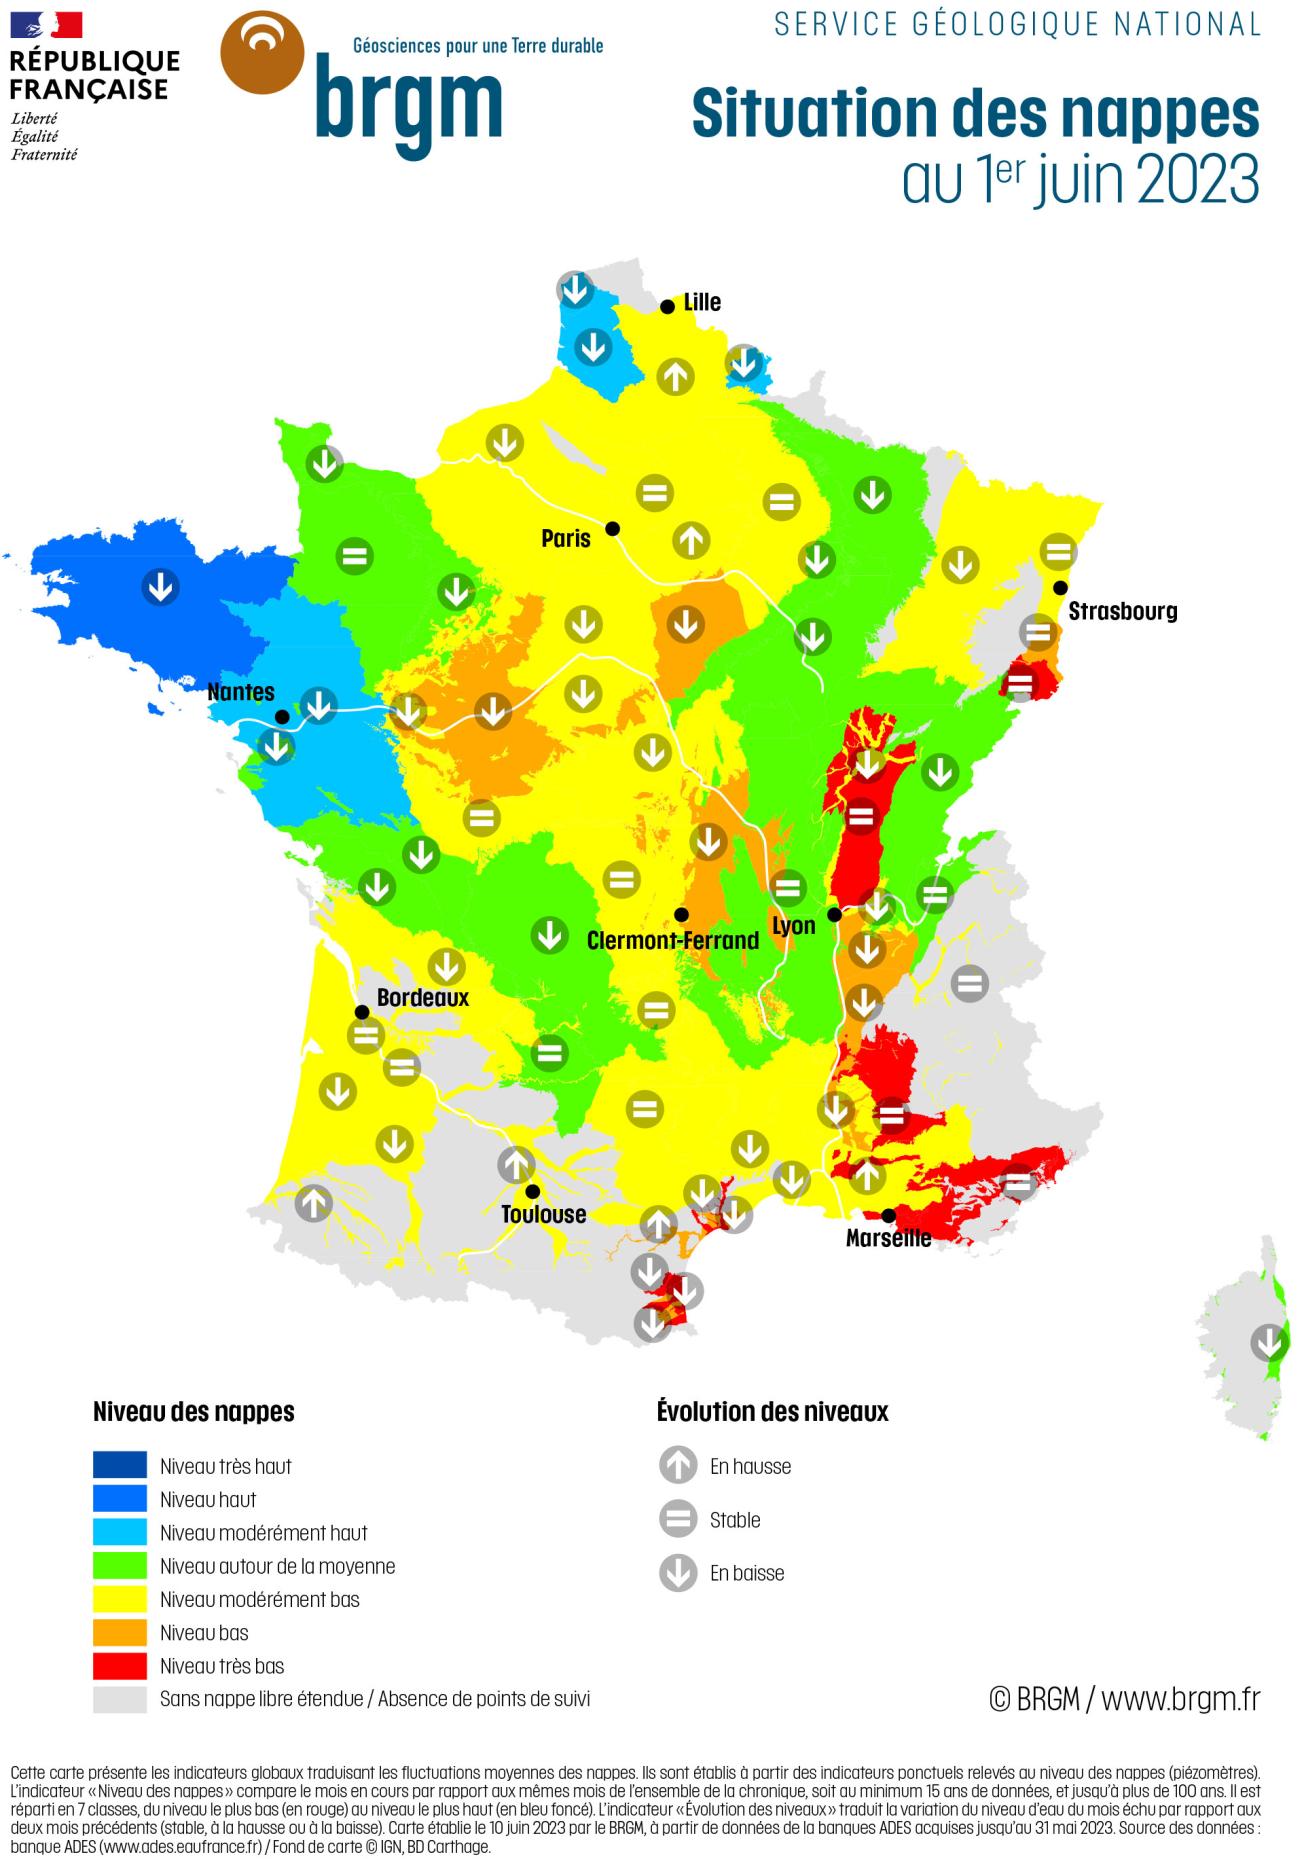 Map of groundwater levels in France on 1 June 2023.